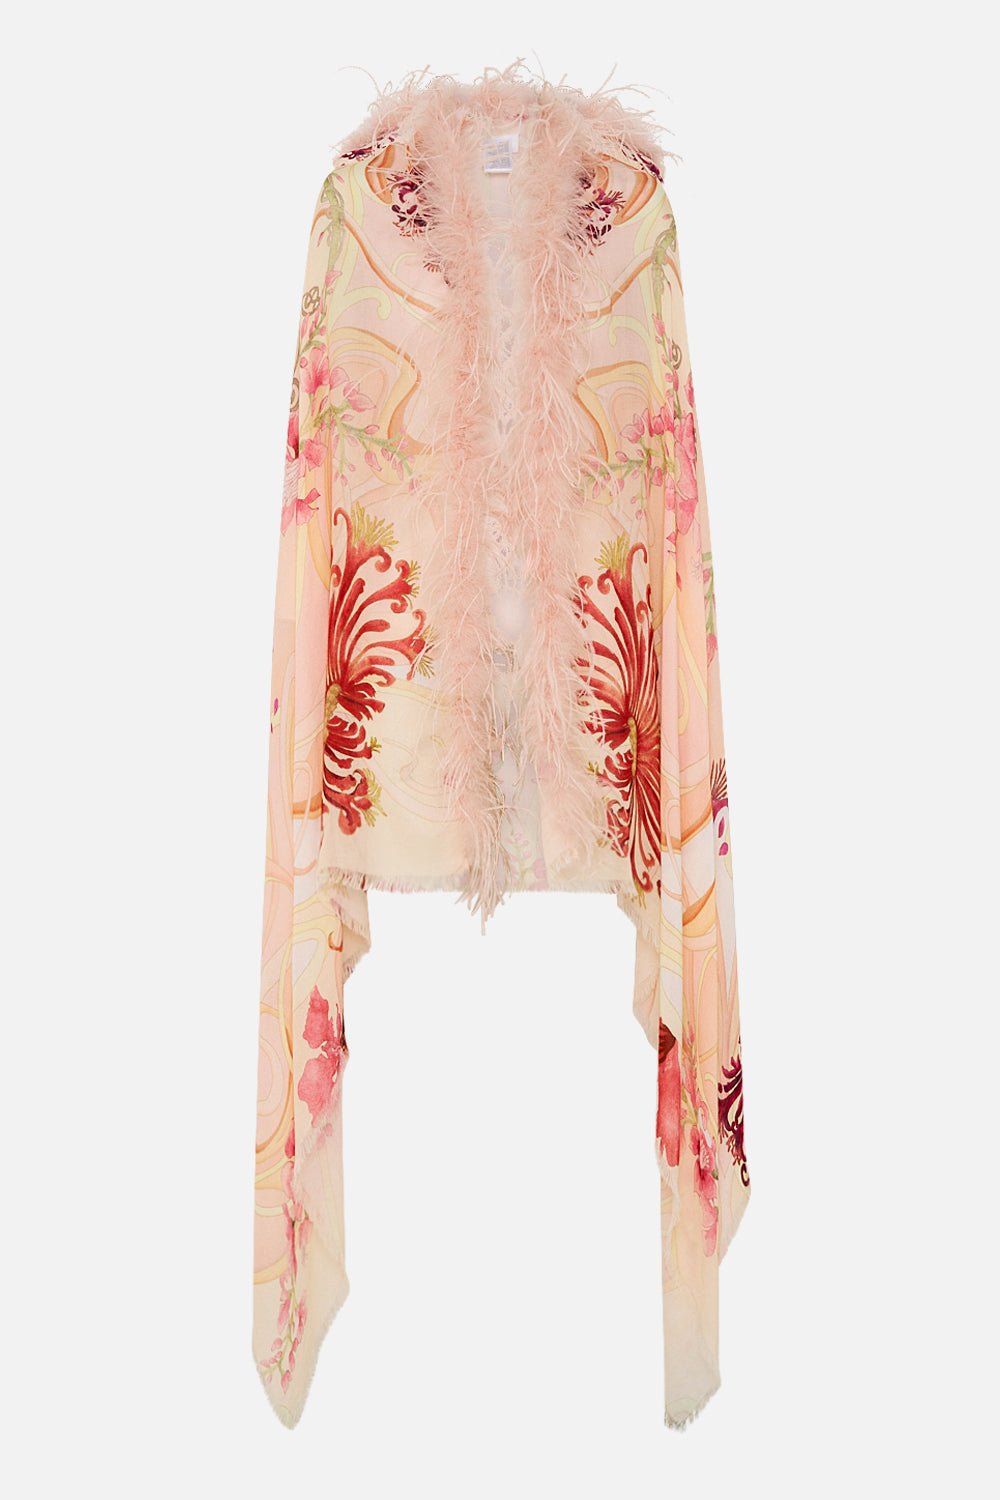 CAMILLA Floral Feather Trim Shawl in Blossoms and Brushstrokes print